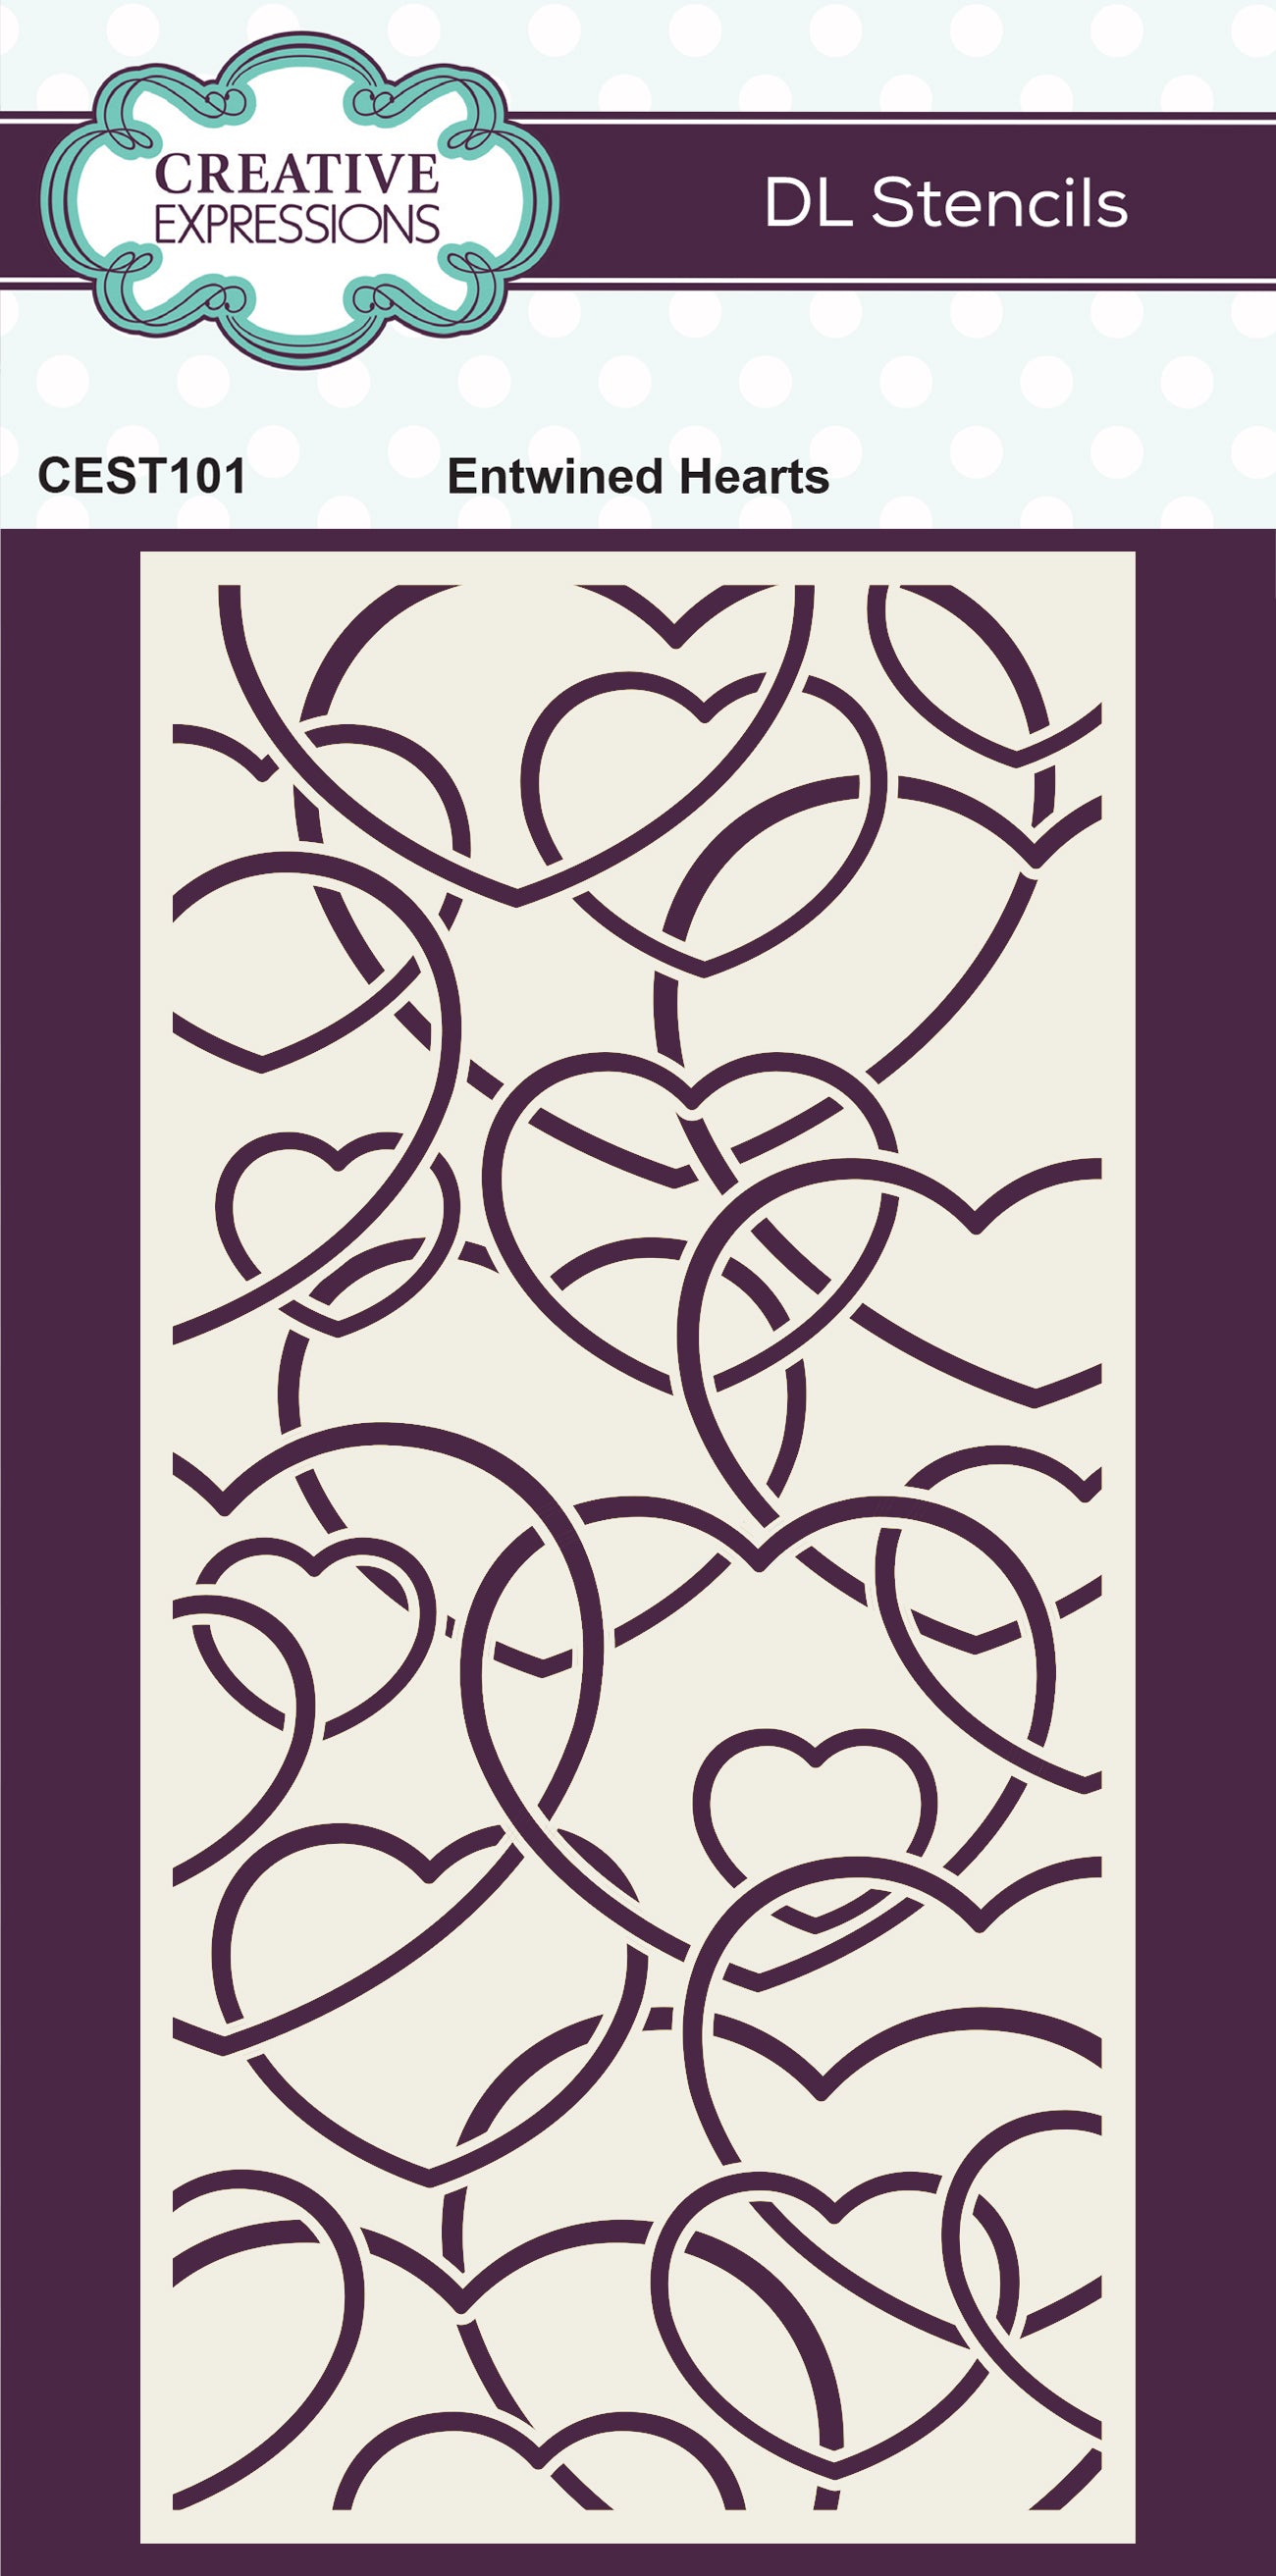 Creative Expressions Entwined Hearts DL Stencil 4 in x 8 in (10.0 x 20.3 cm)